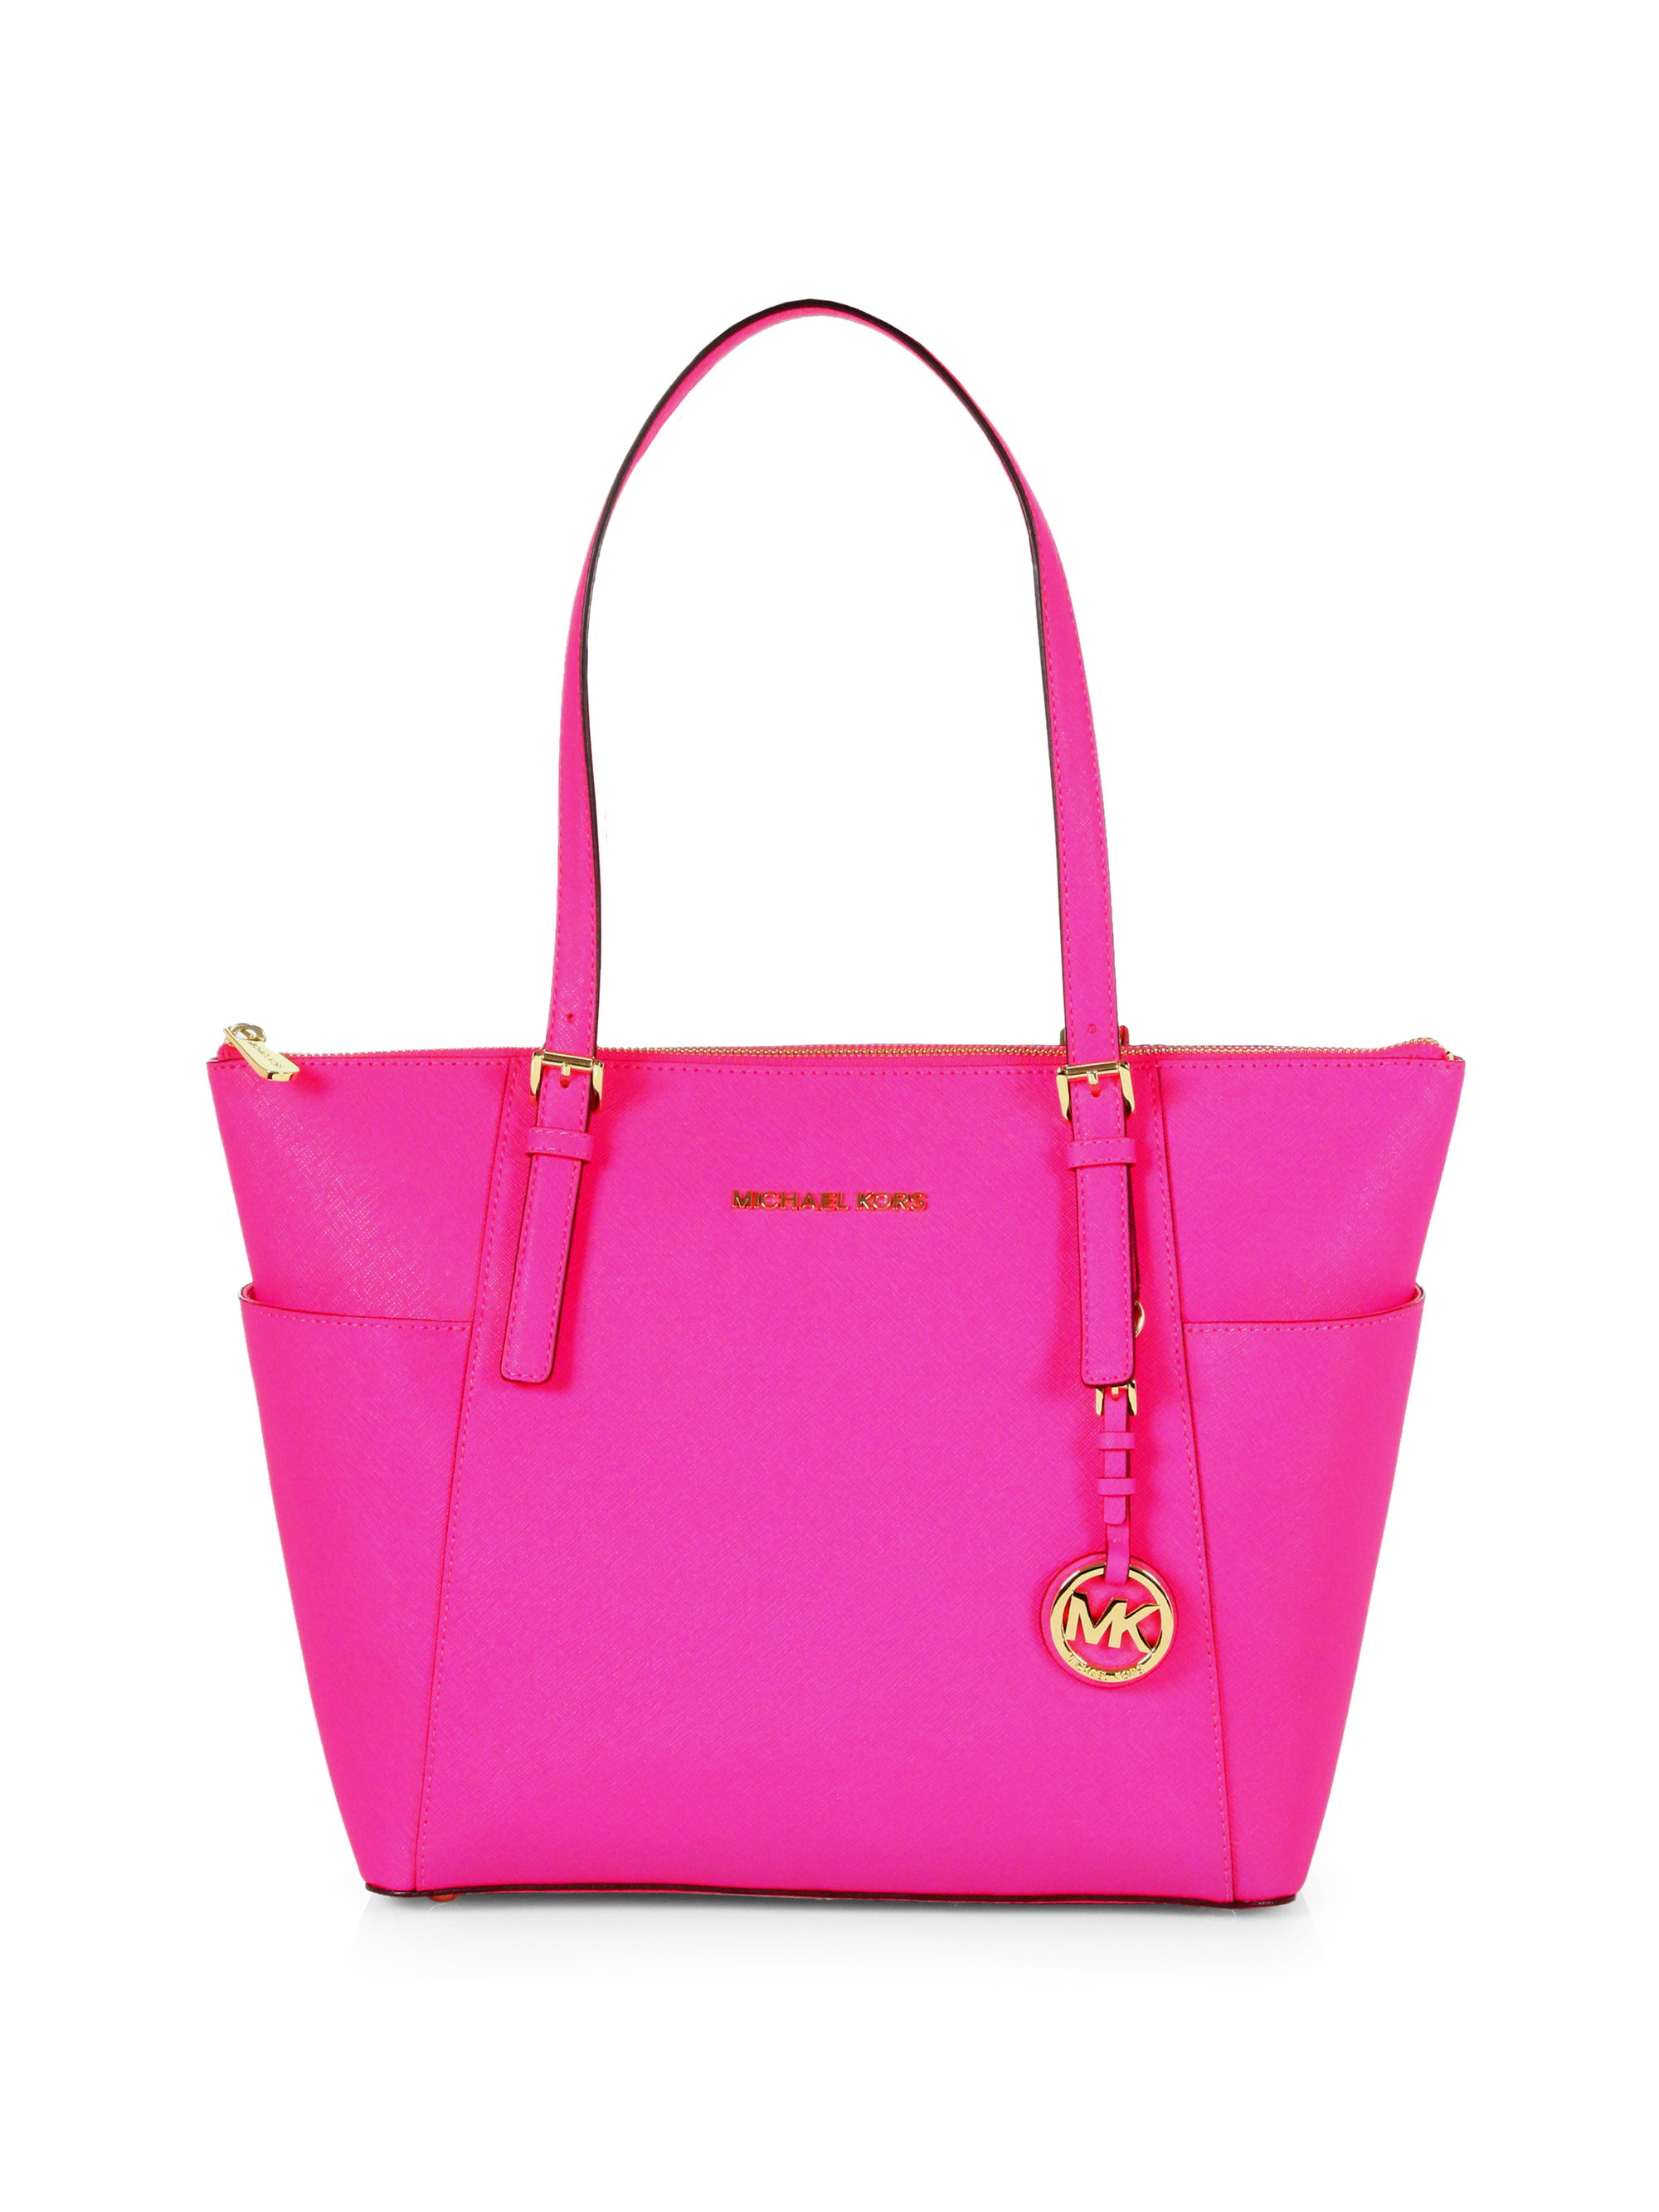 Michael Michael Kors Eastwest Top Zip Saffiano Leather Tote Bag in Pink (neon pink) | Lyst